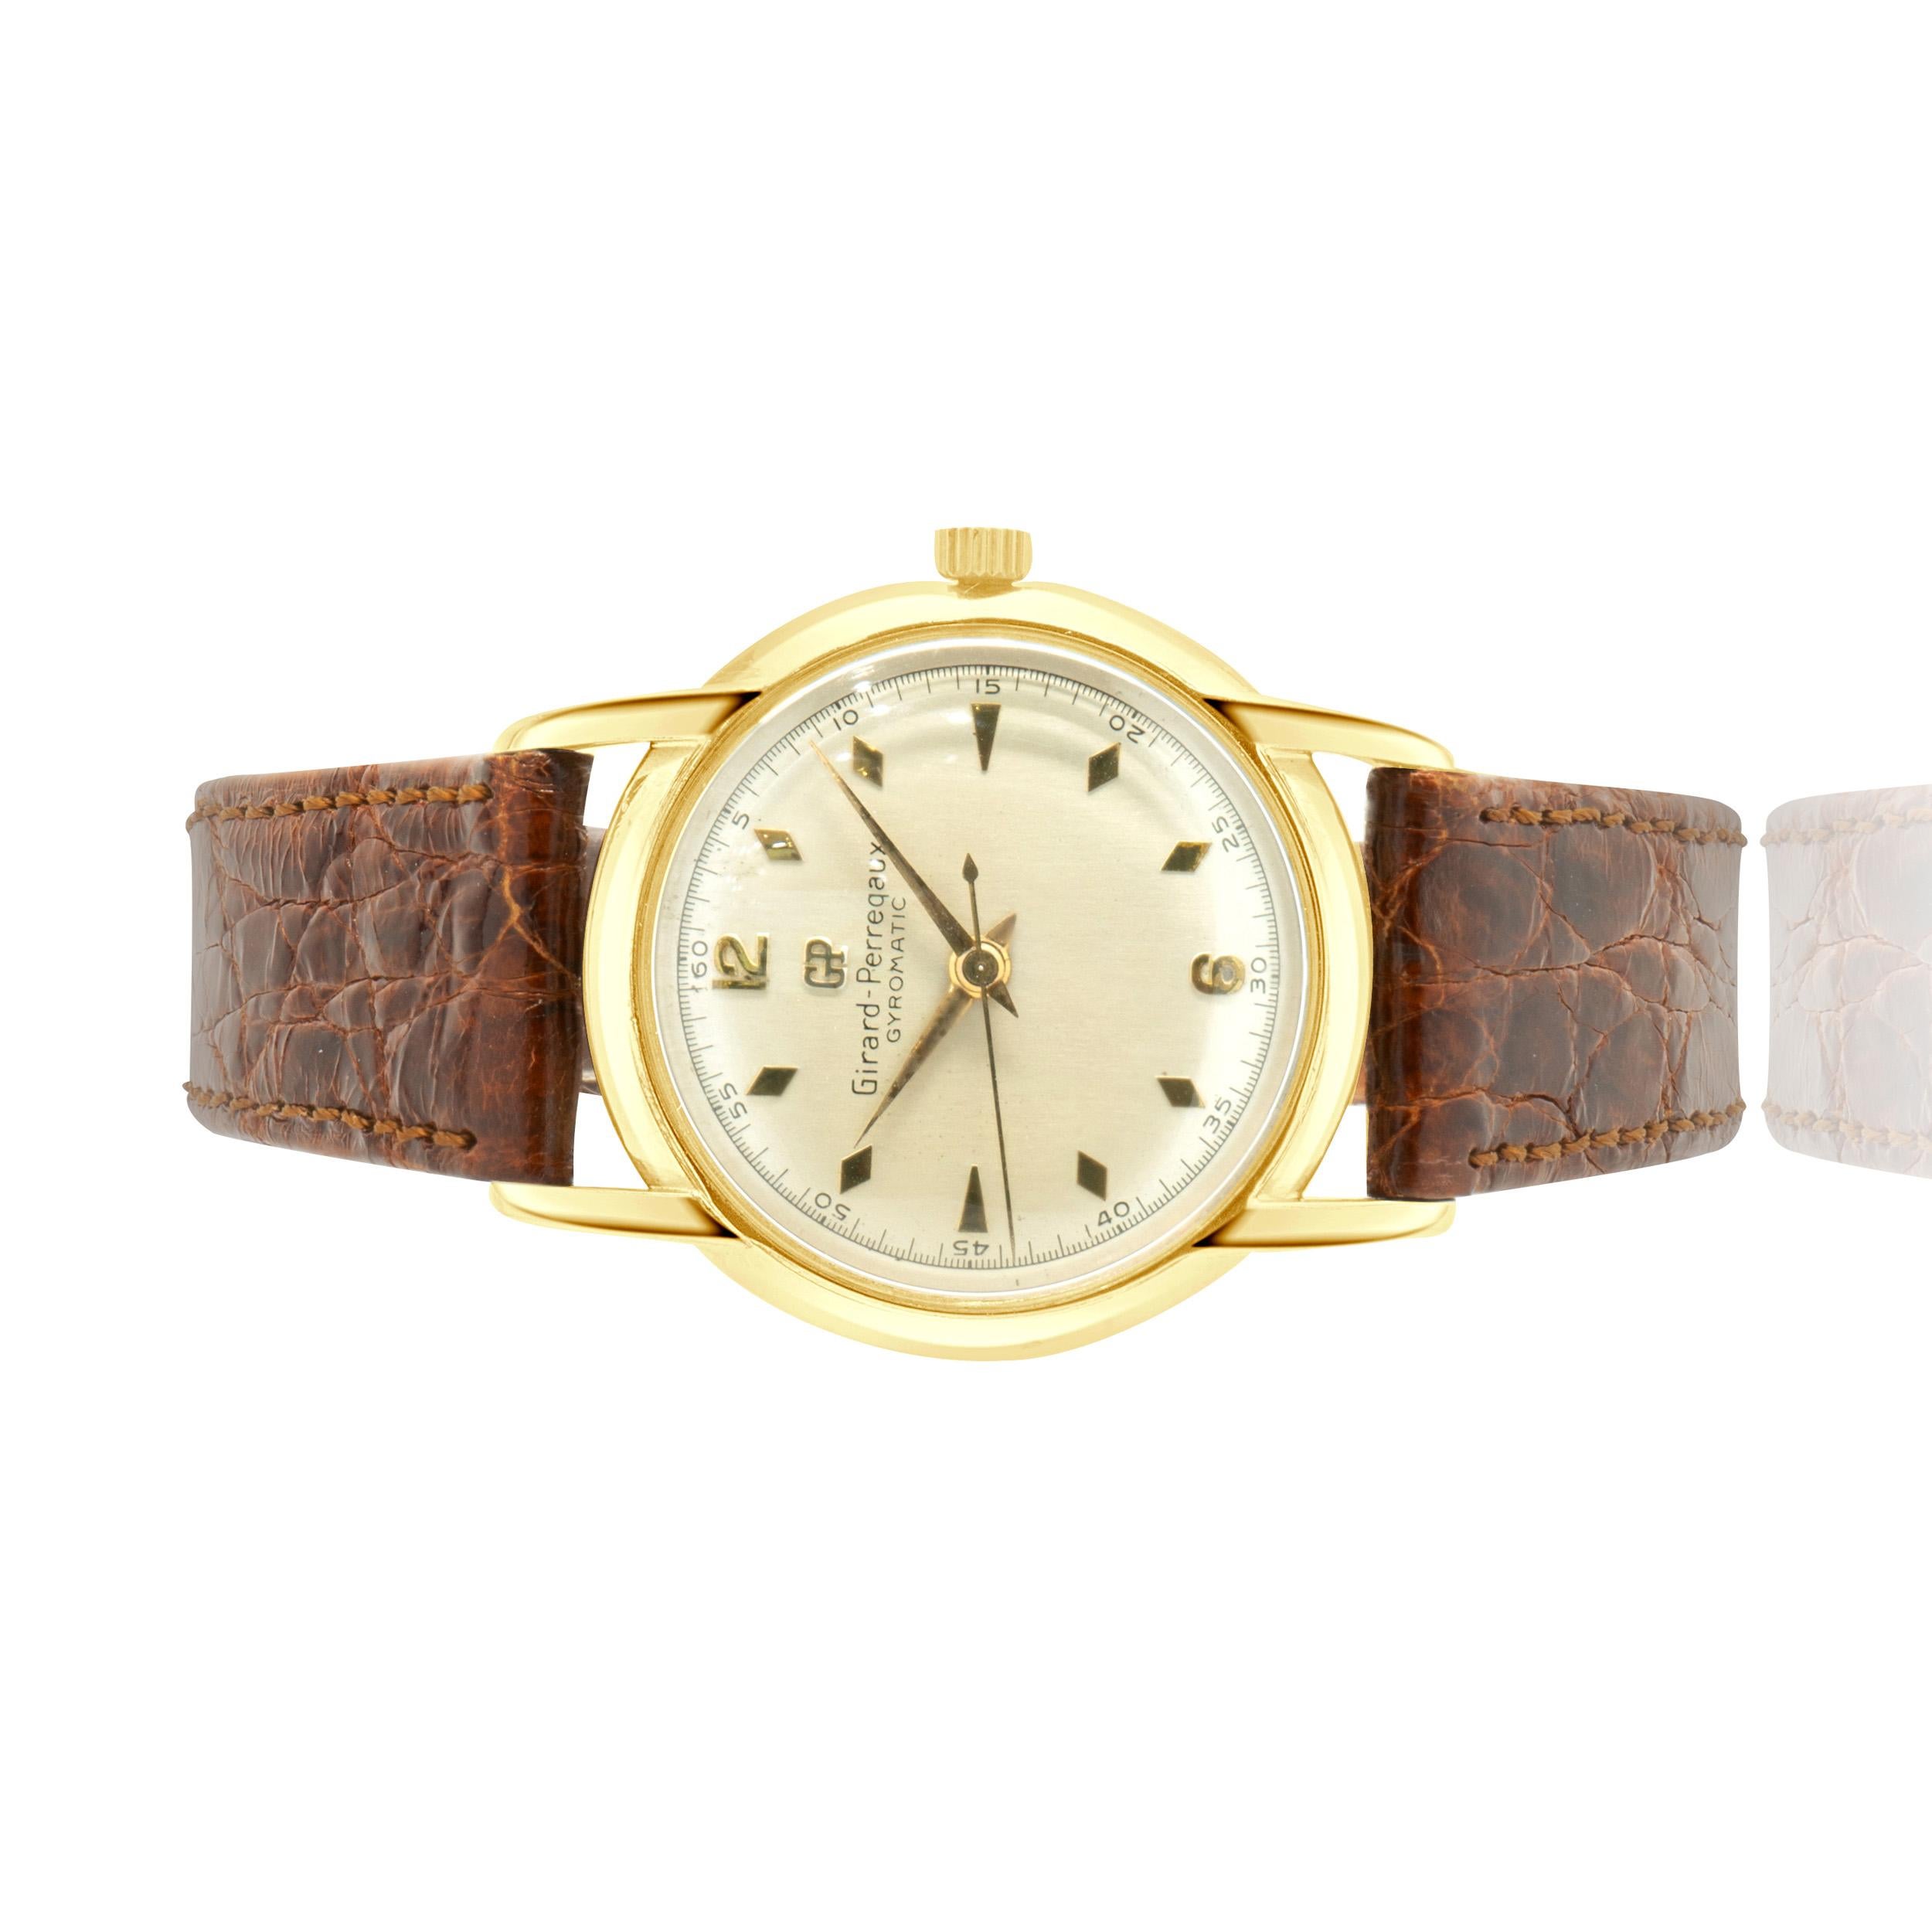 Movement: quartz
Function: hours, minutes, seconds
Case: 31mm stainless steel case
Band: brown leather strap with gold buckle
Dial: white dial, gold hands, gold hours markers
	
No box and papers.
Guaranteed to be authentic by seller.